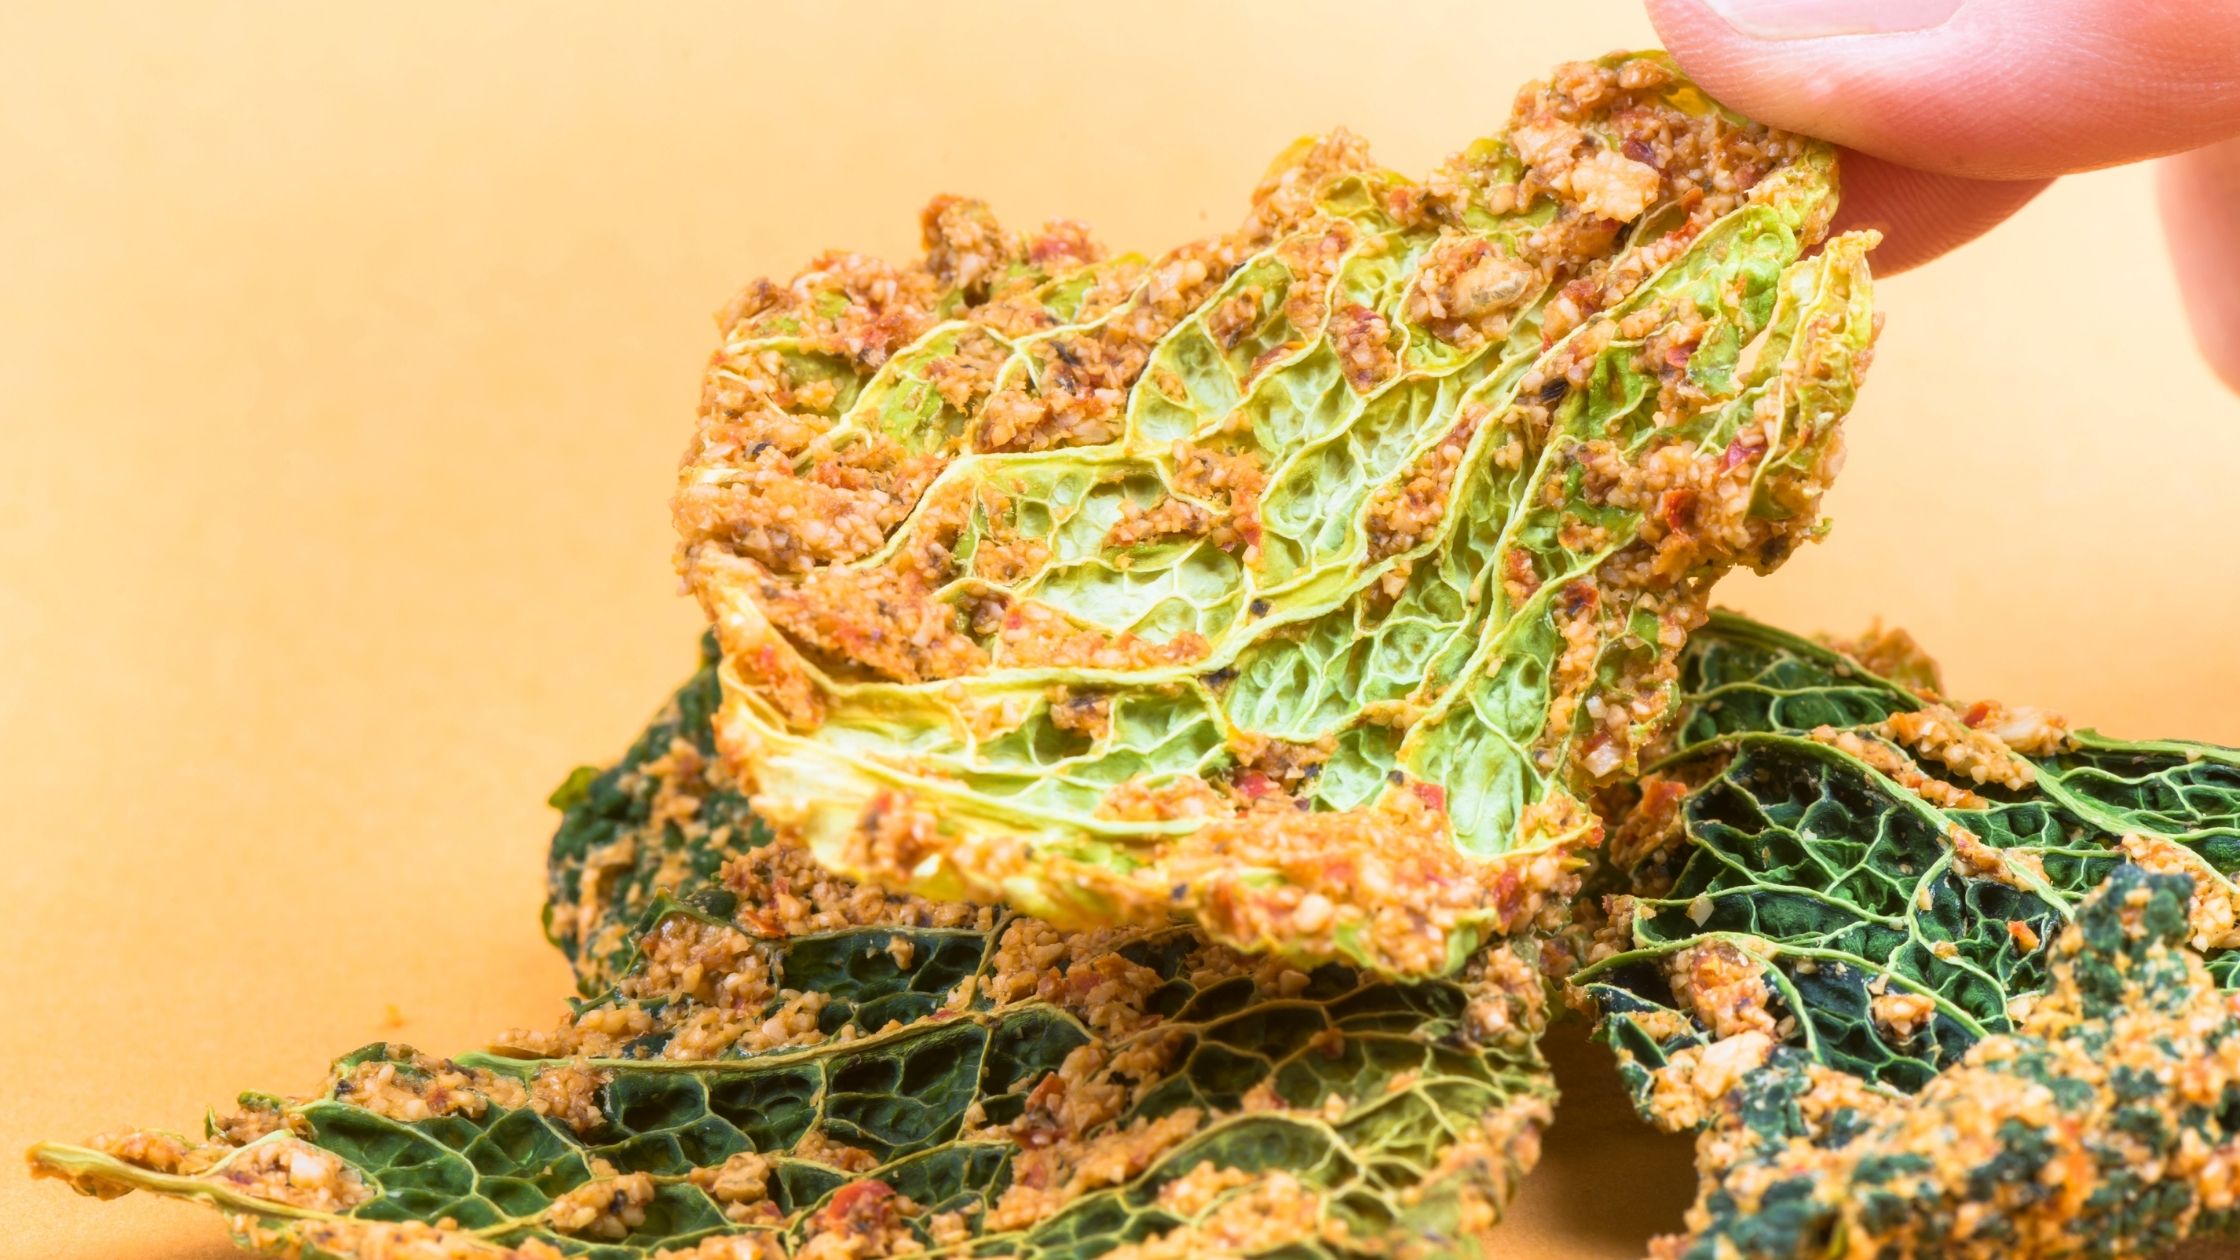 Crunchy Kale Chips instead of Potato Chips